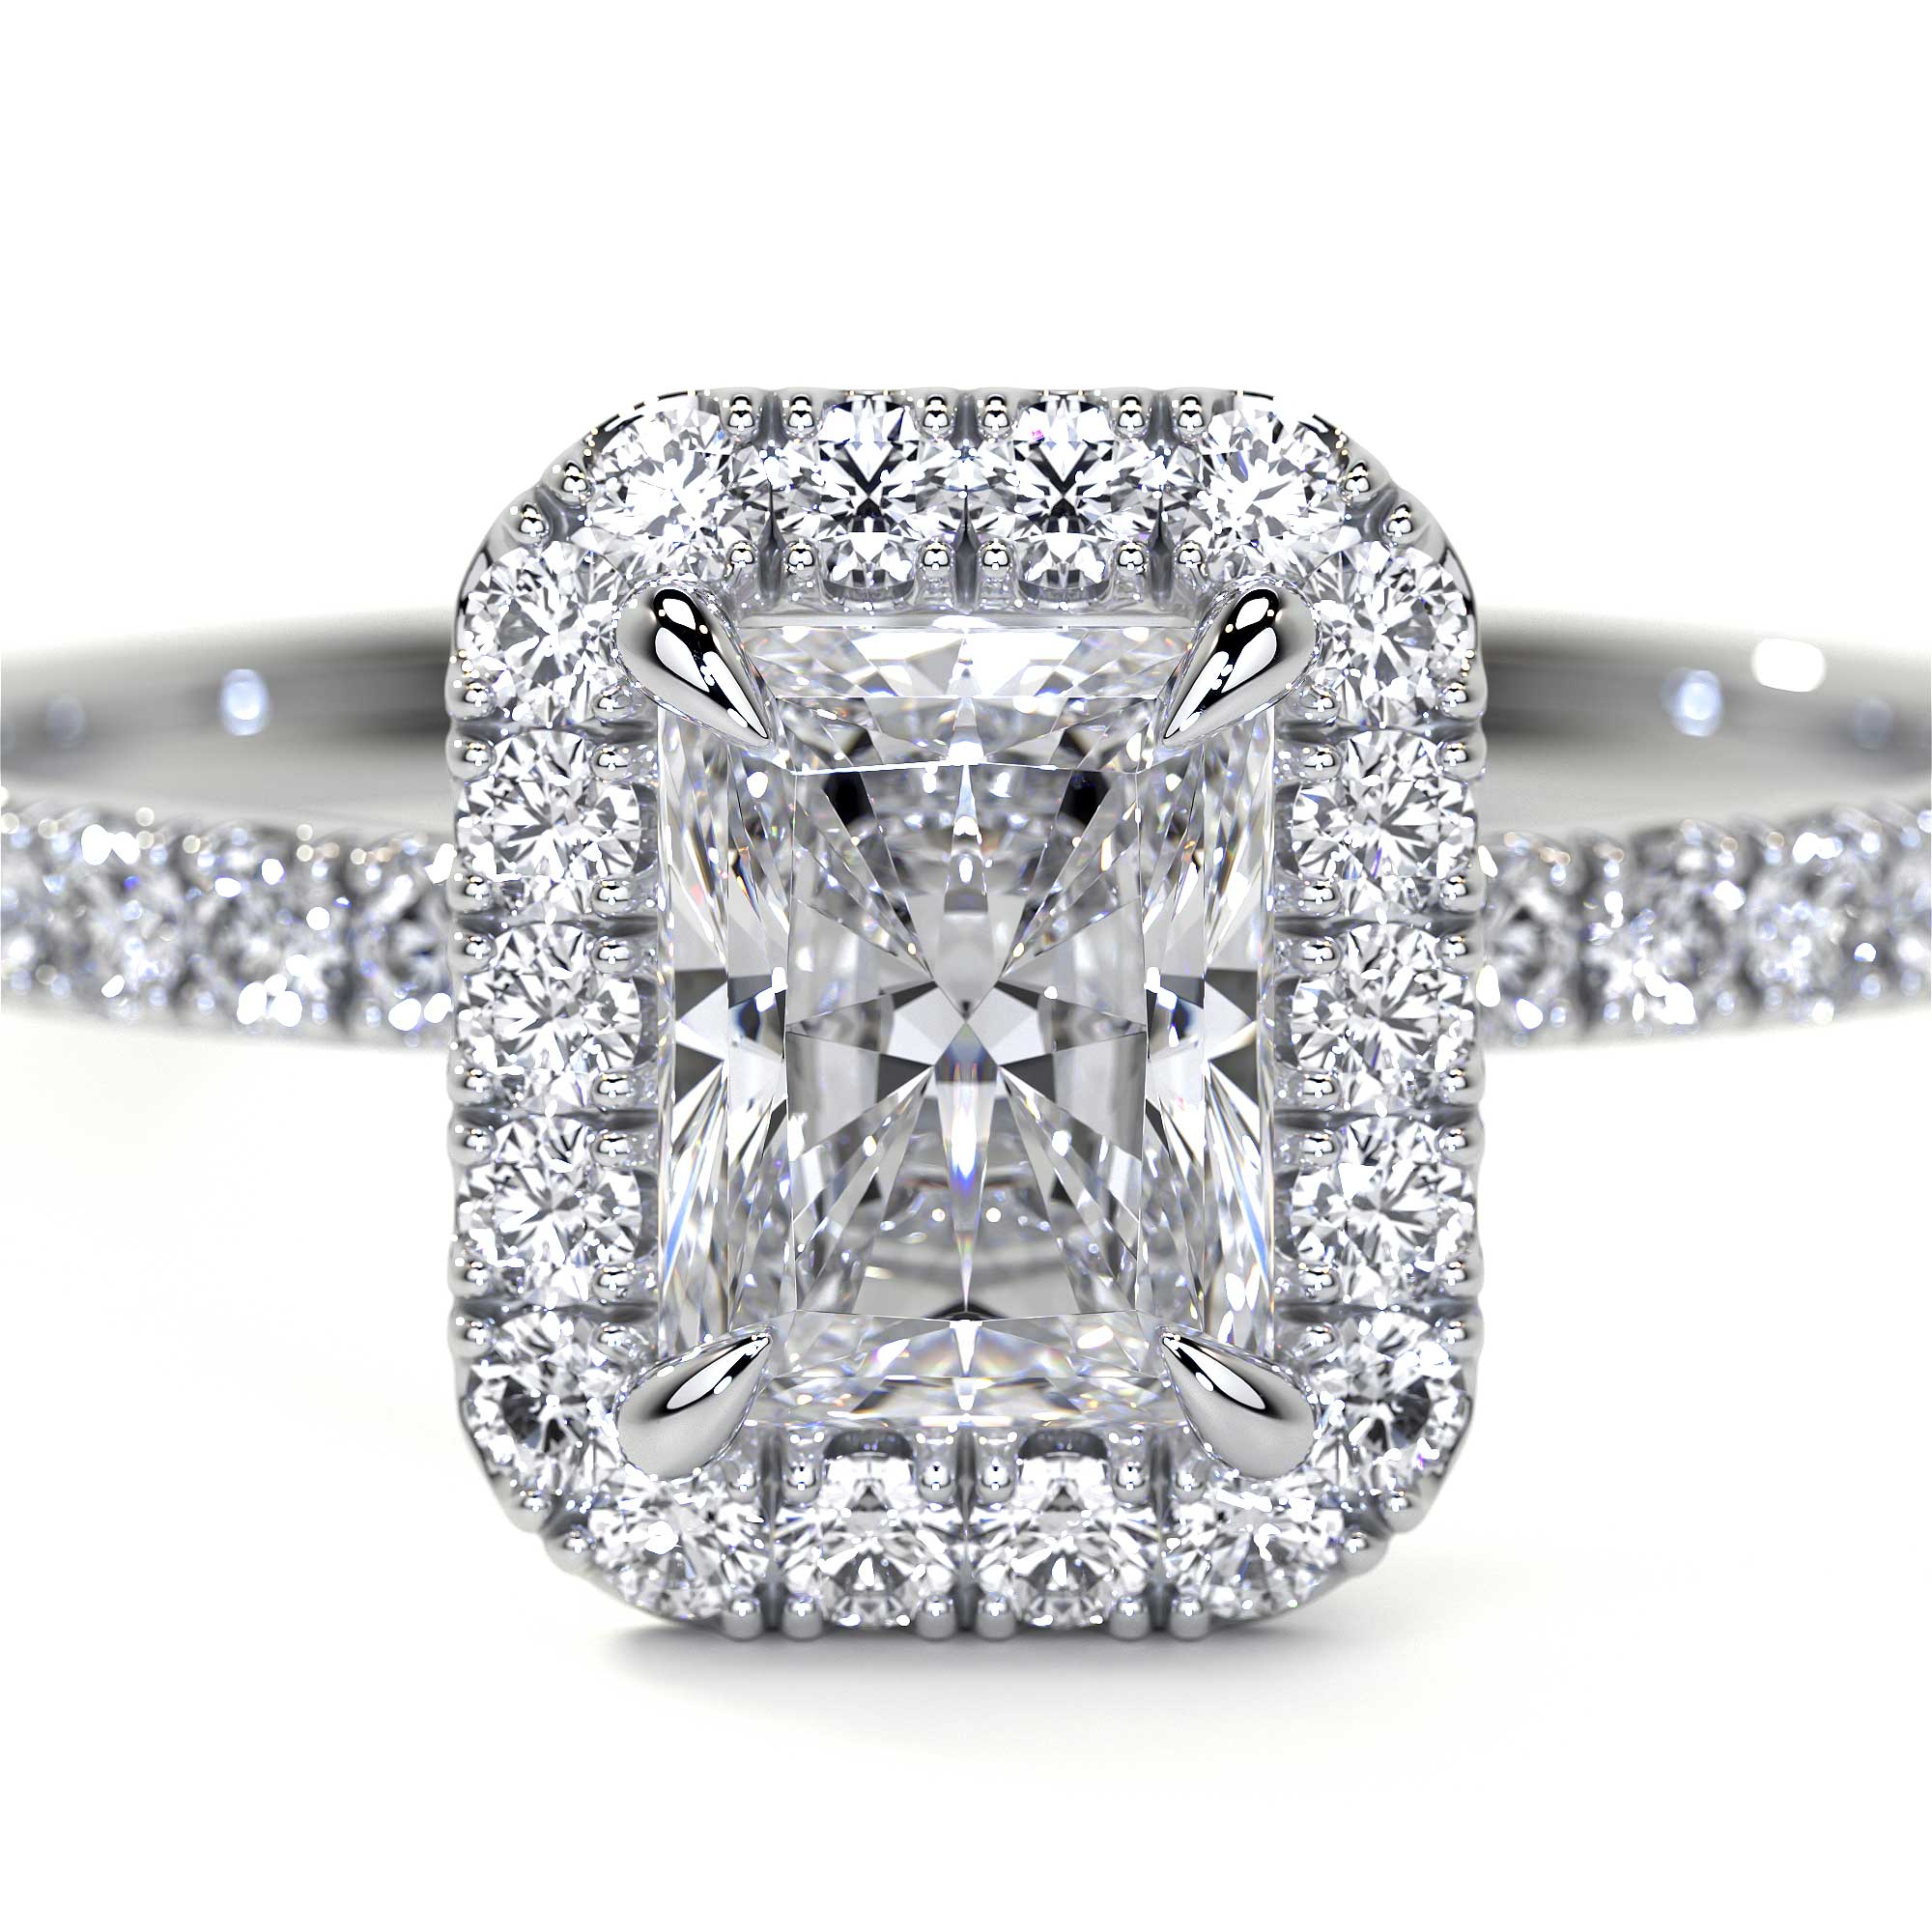 Radiant Cut Cluster Diamond Ring with Halo - Rings - Leviev Diamonds